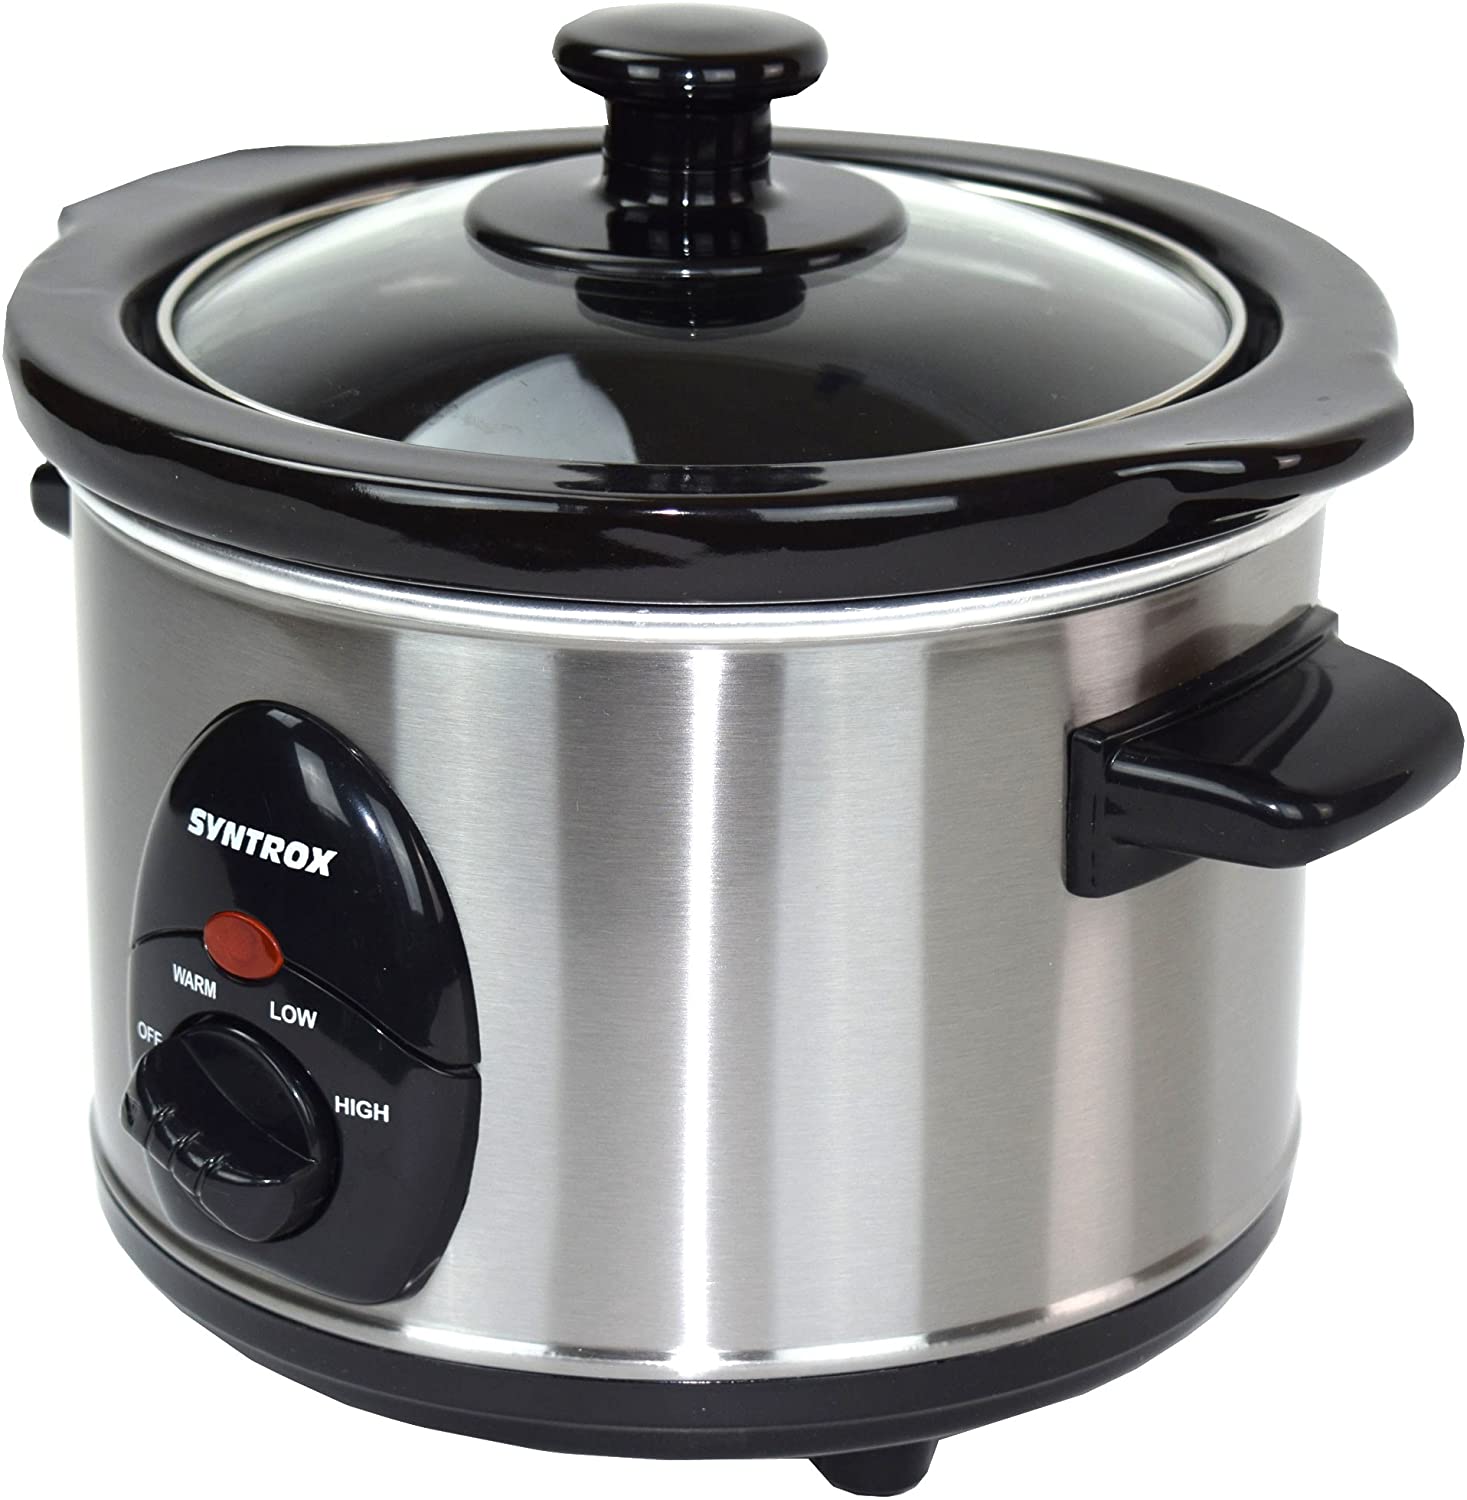 Syntrox Germany 1.5 litre stainless steel slow cooker with warming function, safety glass and removable ceramic bowl, slow cooker